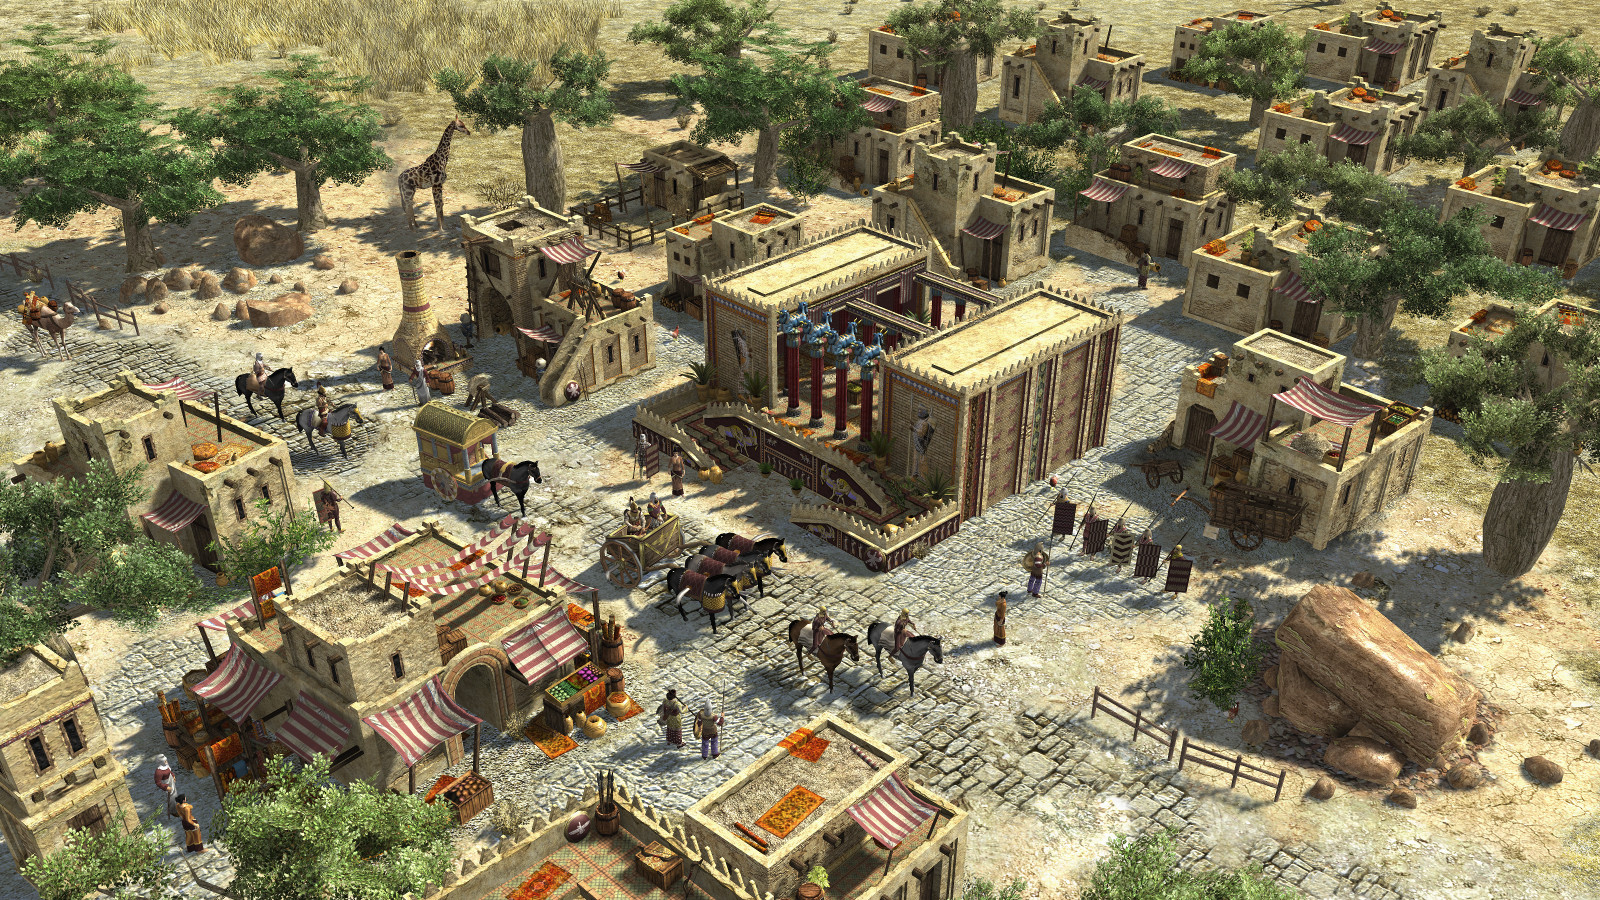 Want to Play Age of Empires for Mac? Try 0 A.D. Instead, & It's Free